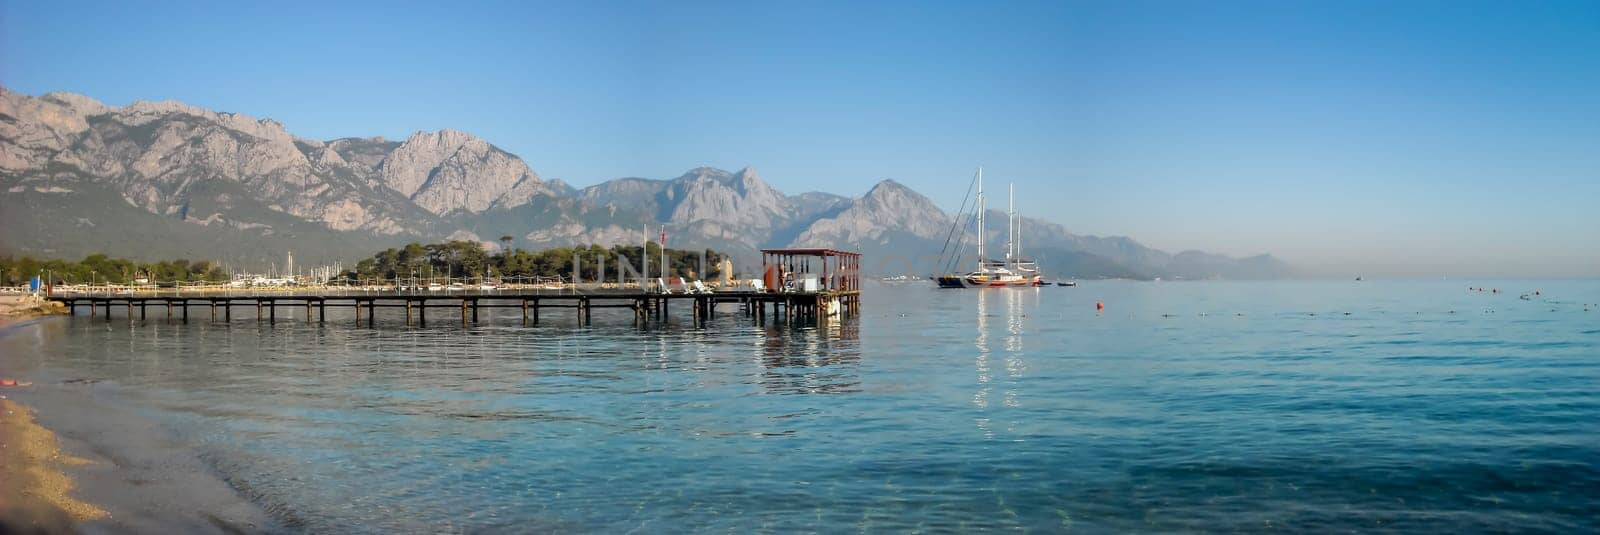 View of the Kemer bay by Giamplume